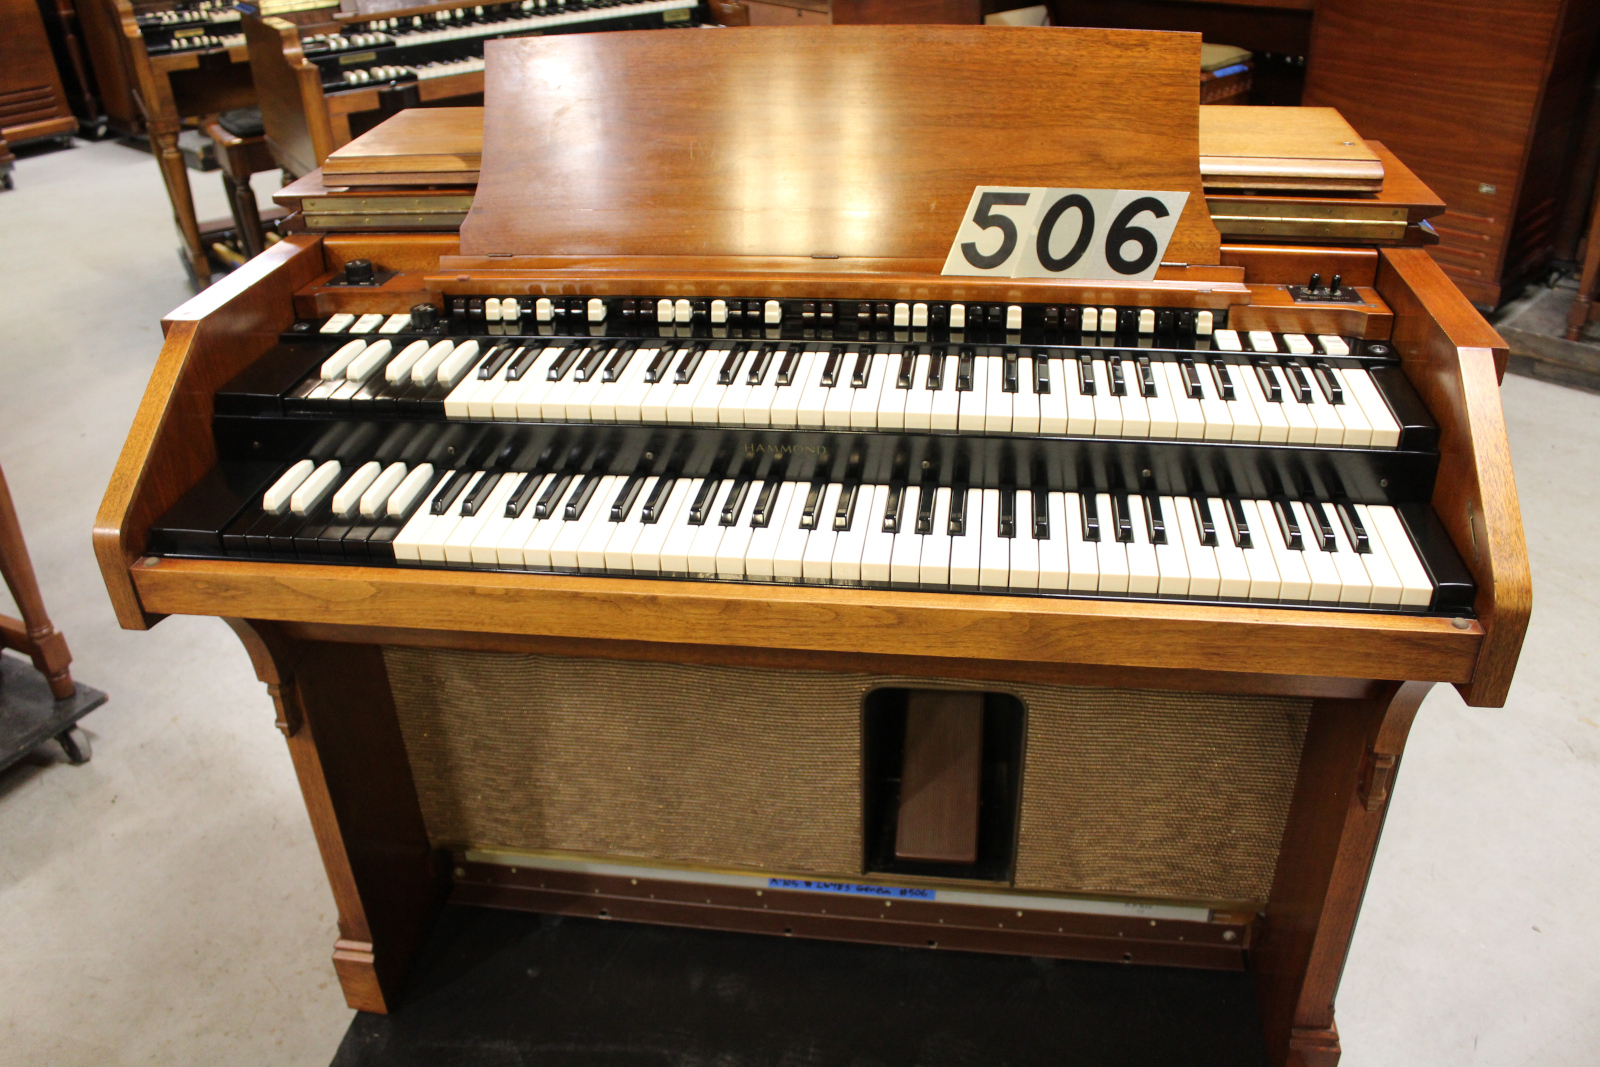 506 is a 1964 Hammond A-105 with some minor sun fading. Serial #26483